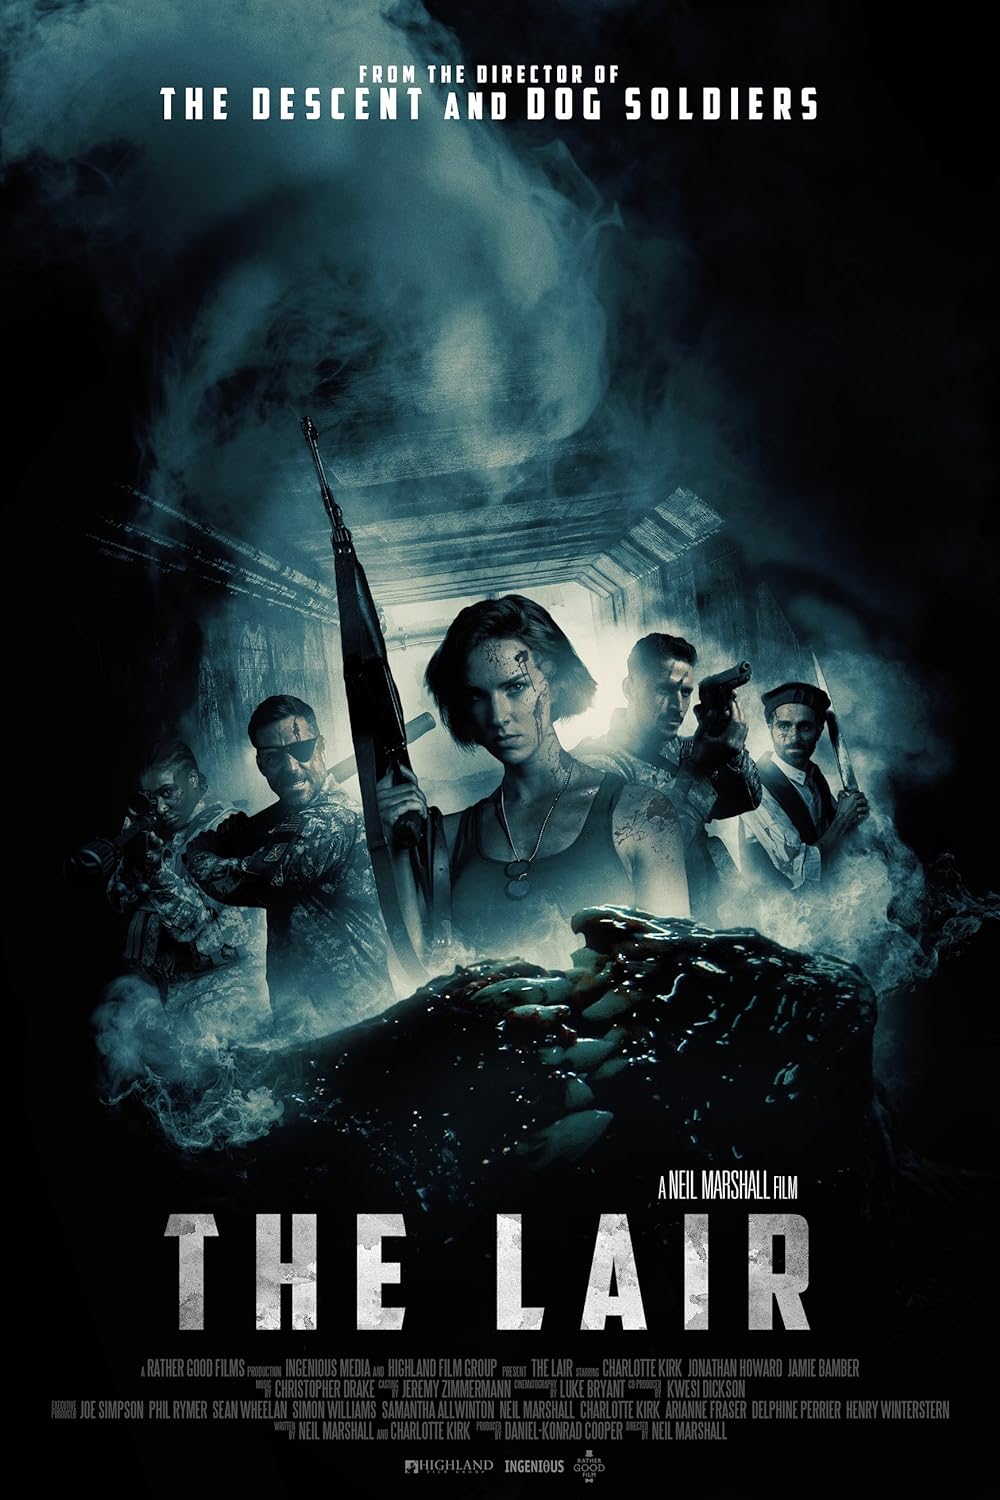 THE LAIR (2022)